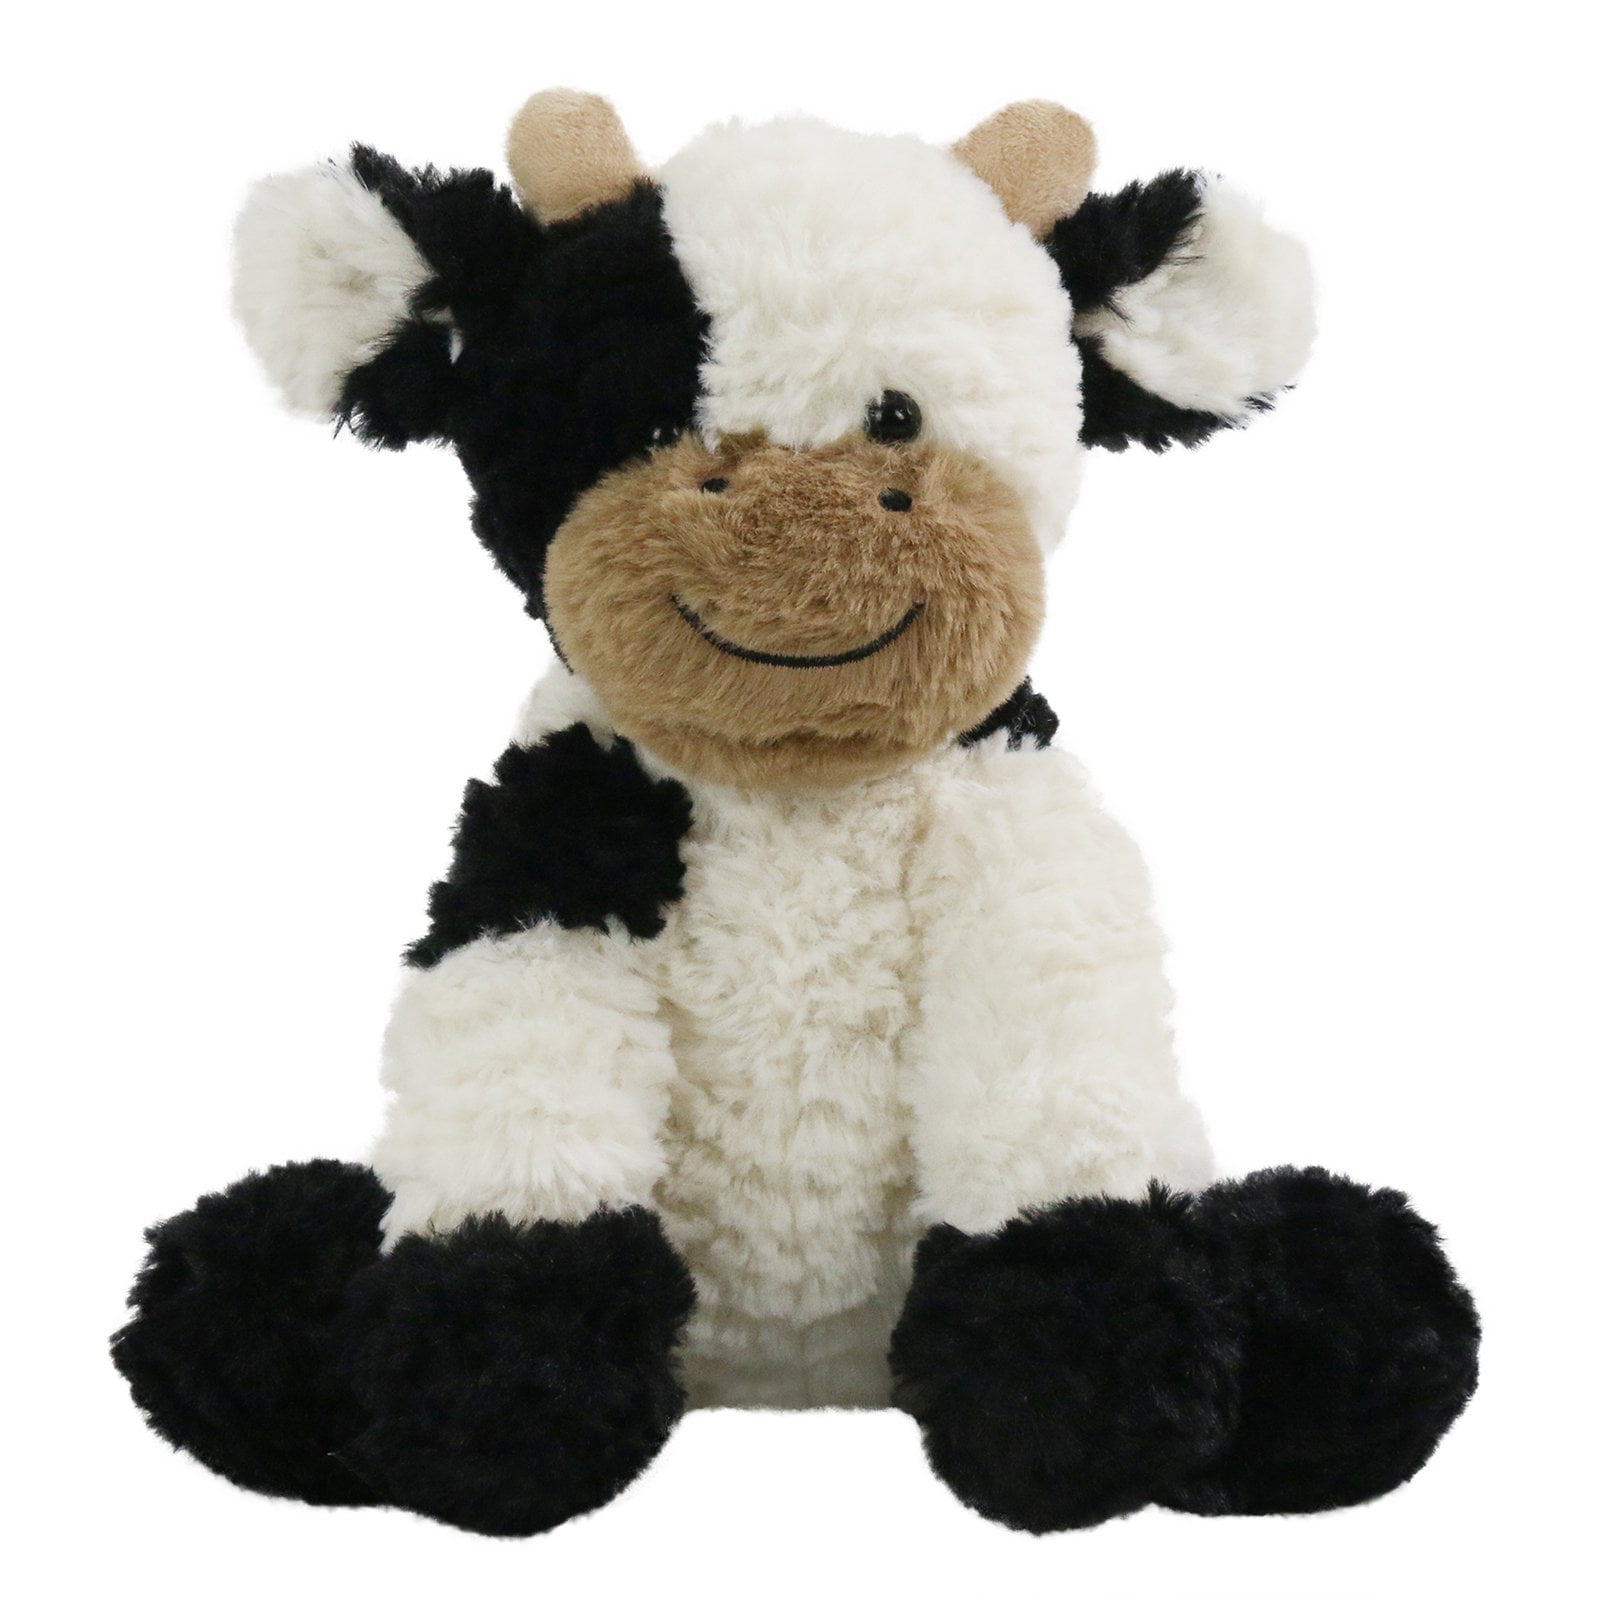 9 inches SpecialYou Cute Cow Stuffed Animal Soft Plush Farm Animal Toy Great Gift Idea White&Black Cow 